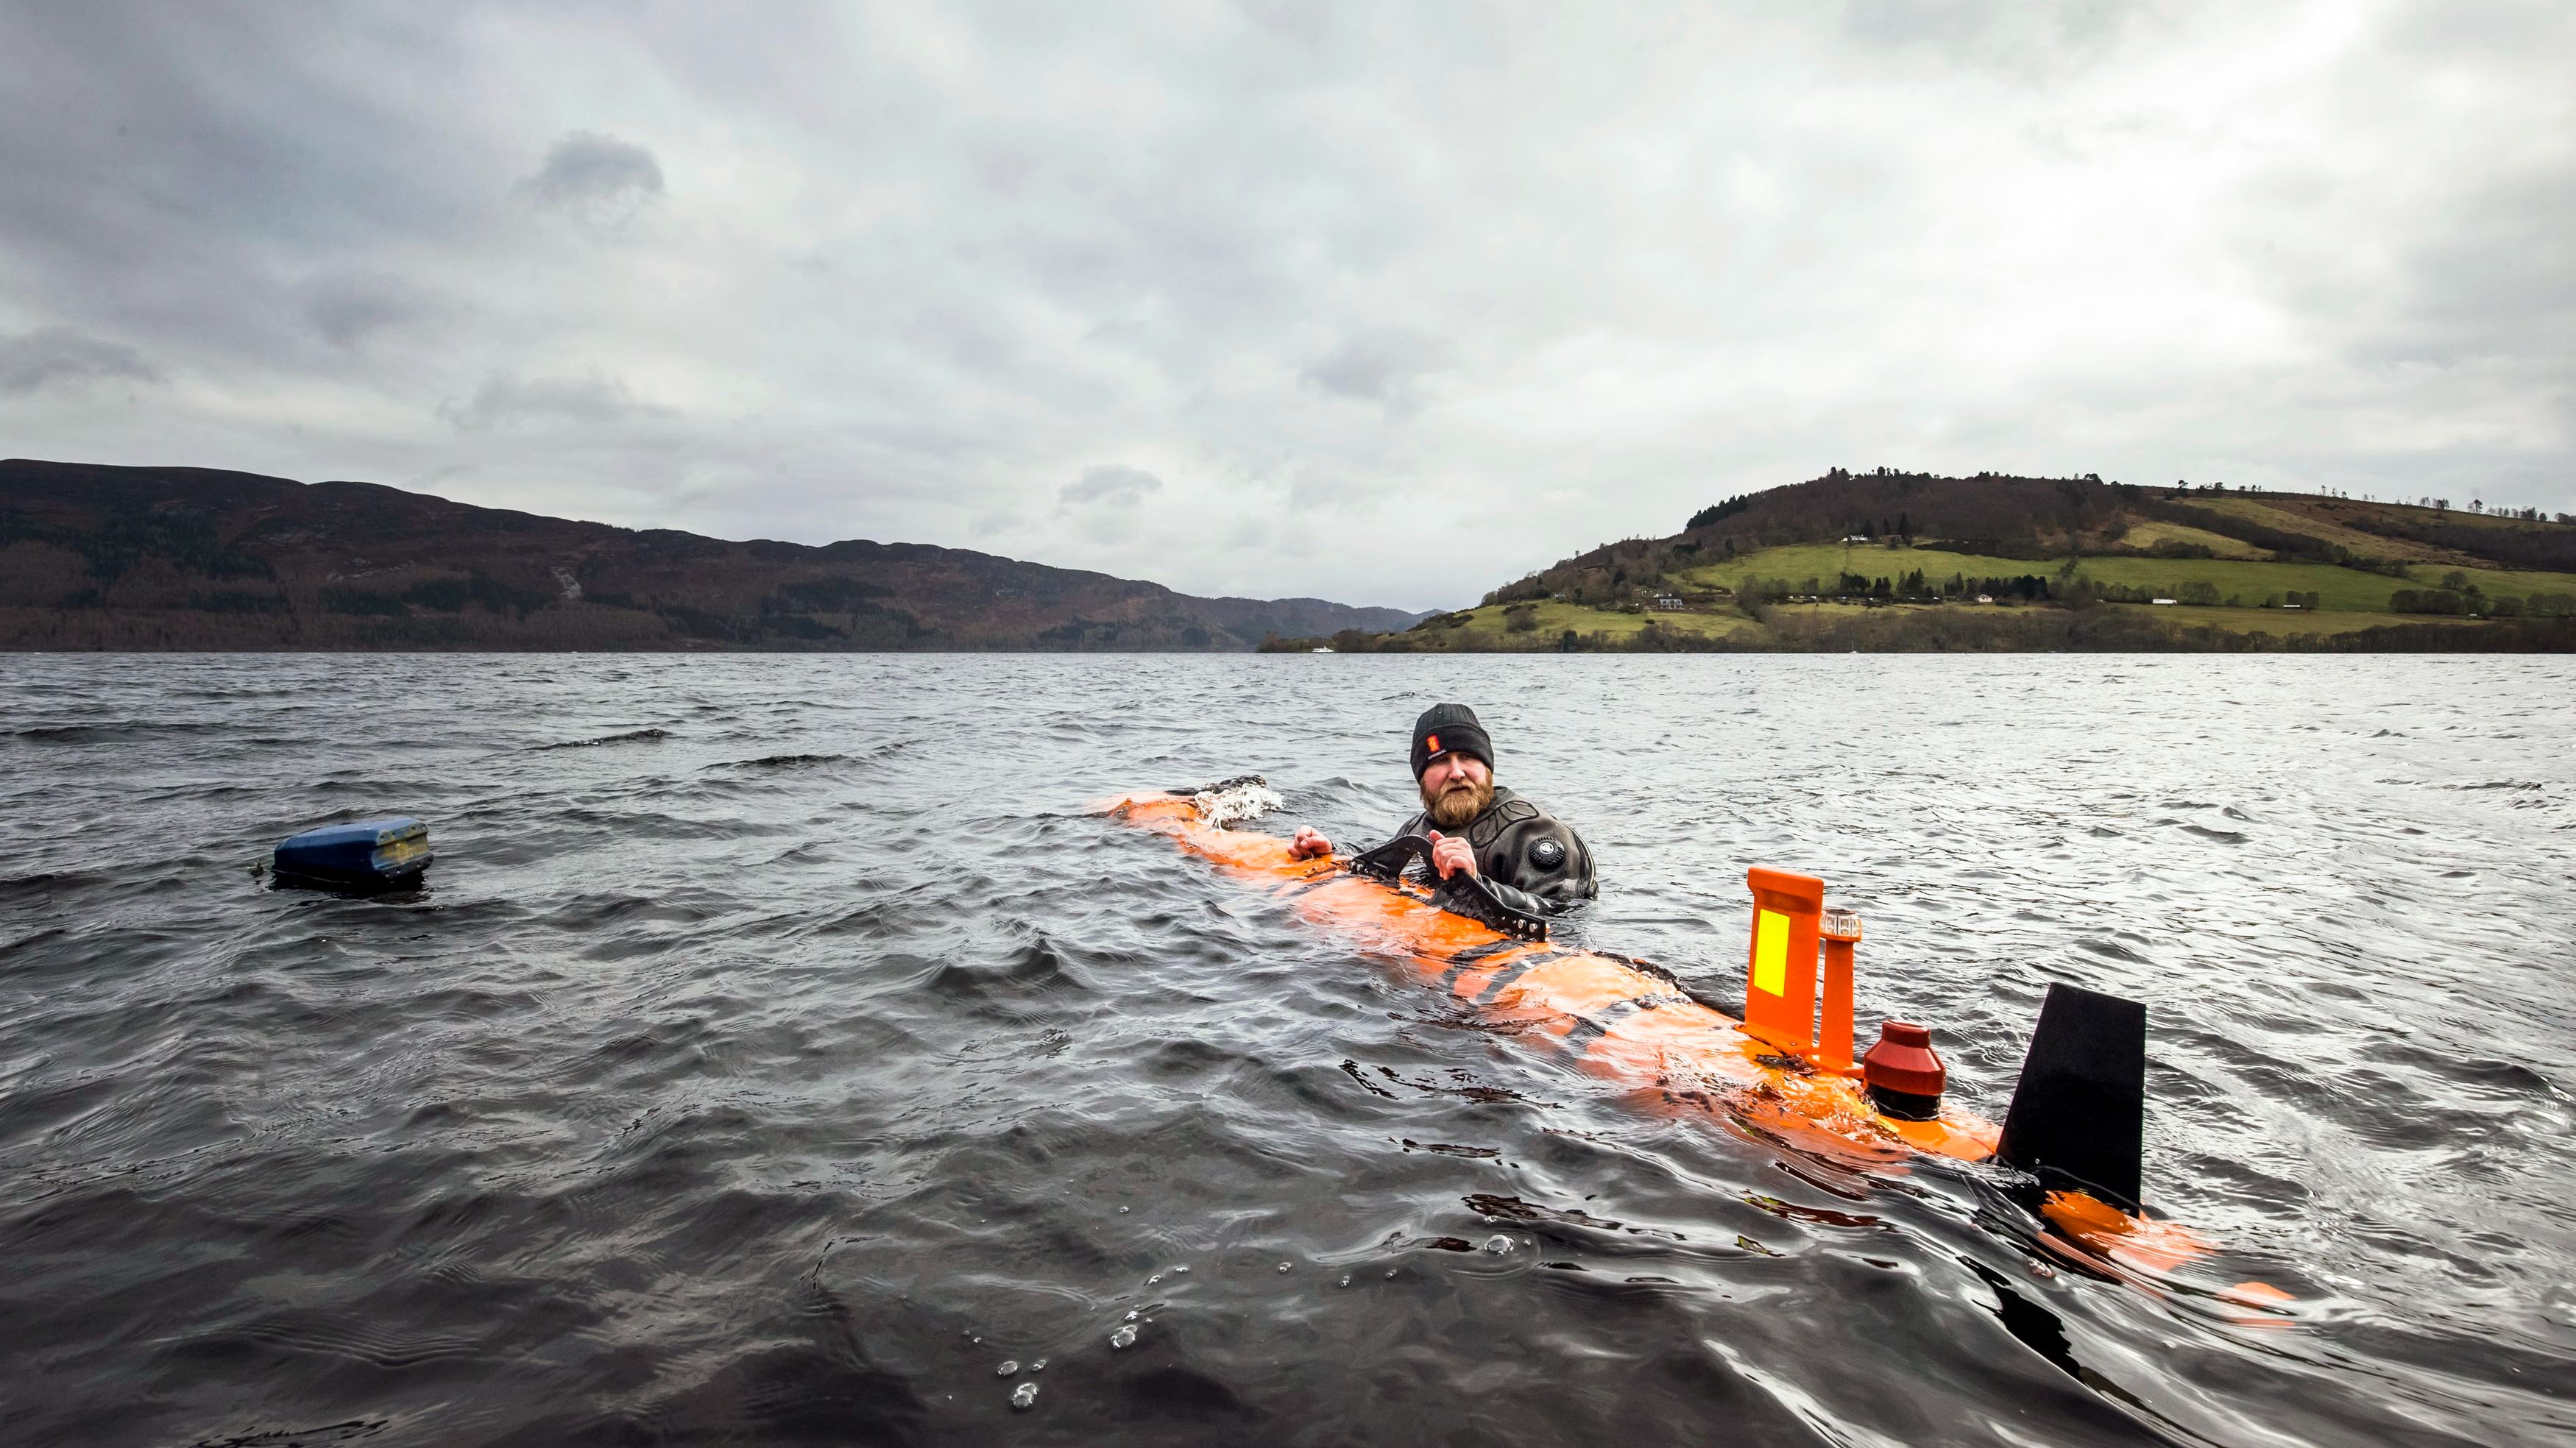 Loch Ness monster search party uses new tools to look for an old